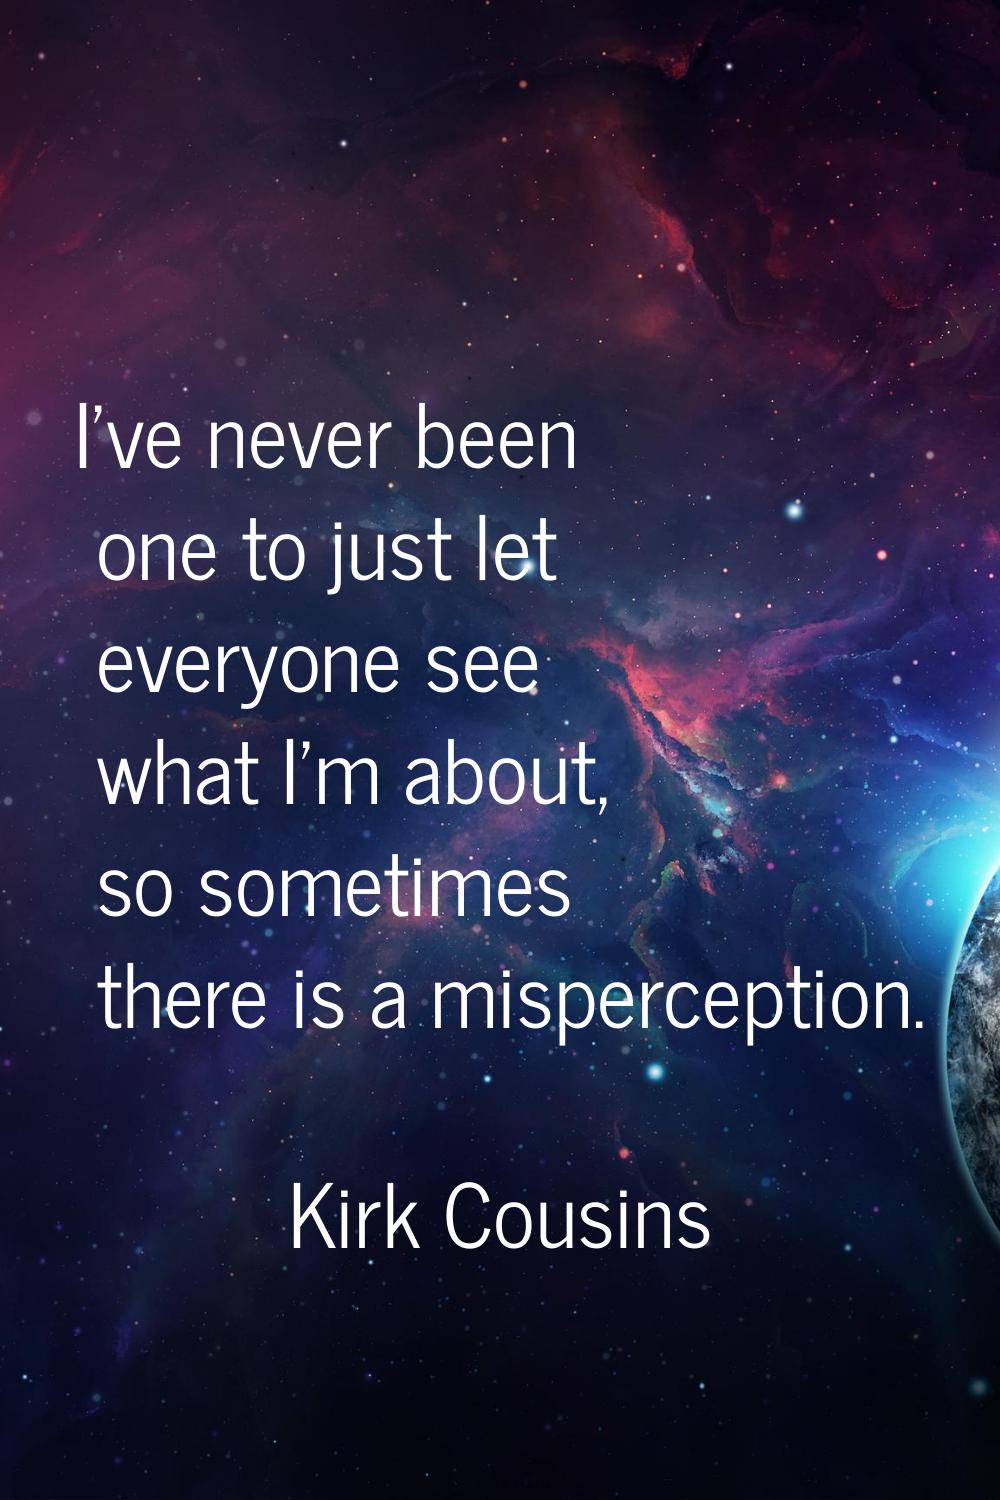 I've never been one to just let everyone see what I’m about, so sometimes there is a misperception.